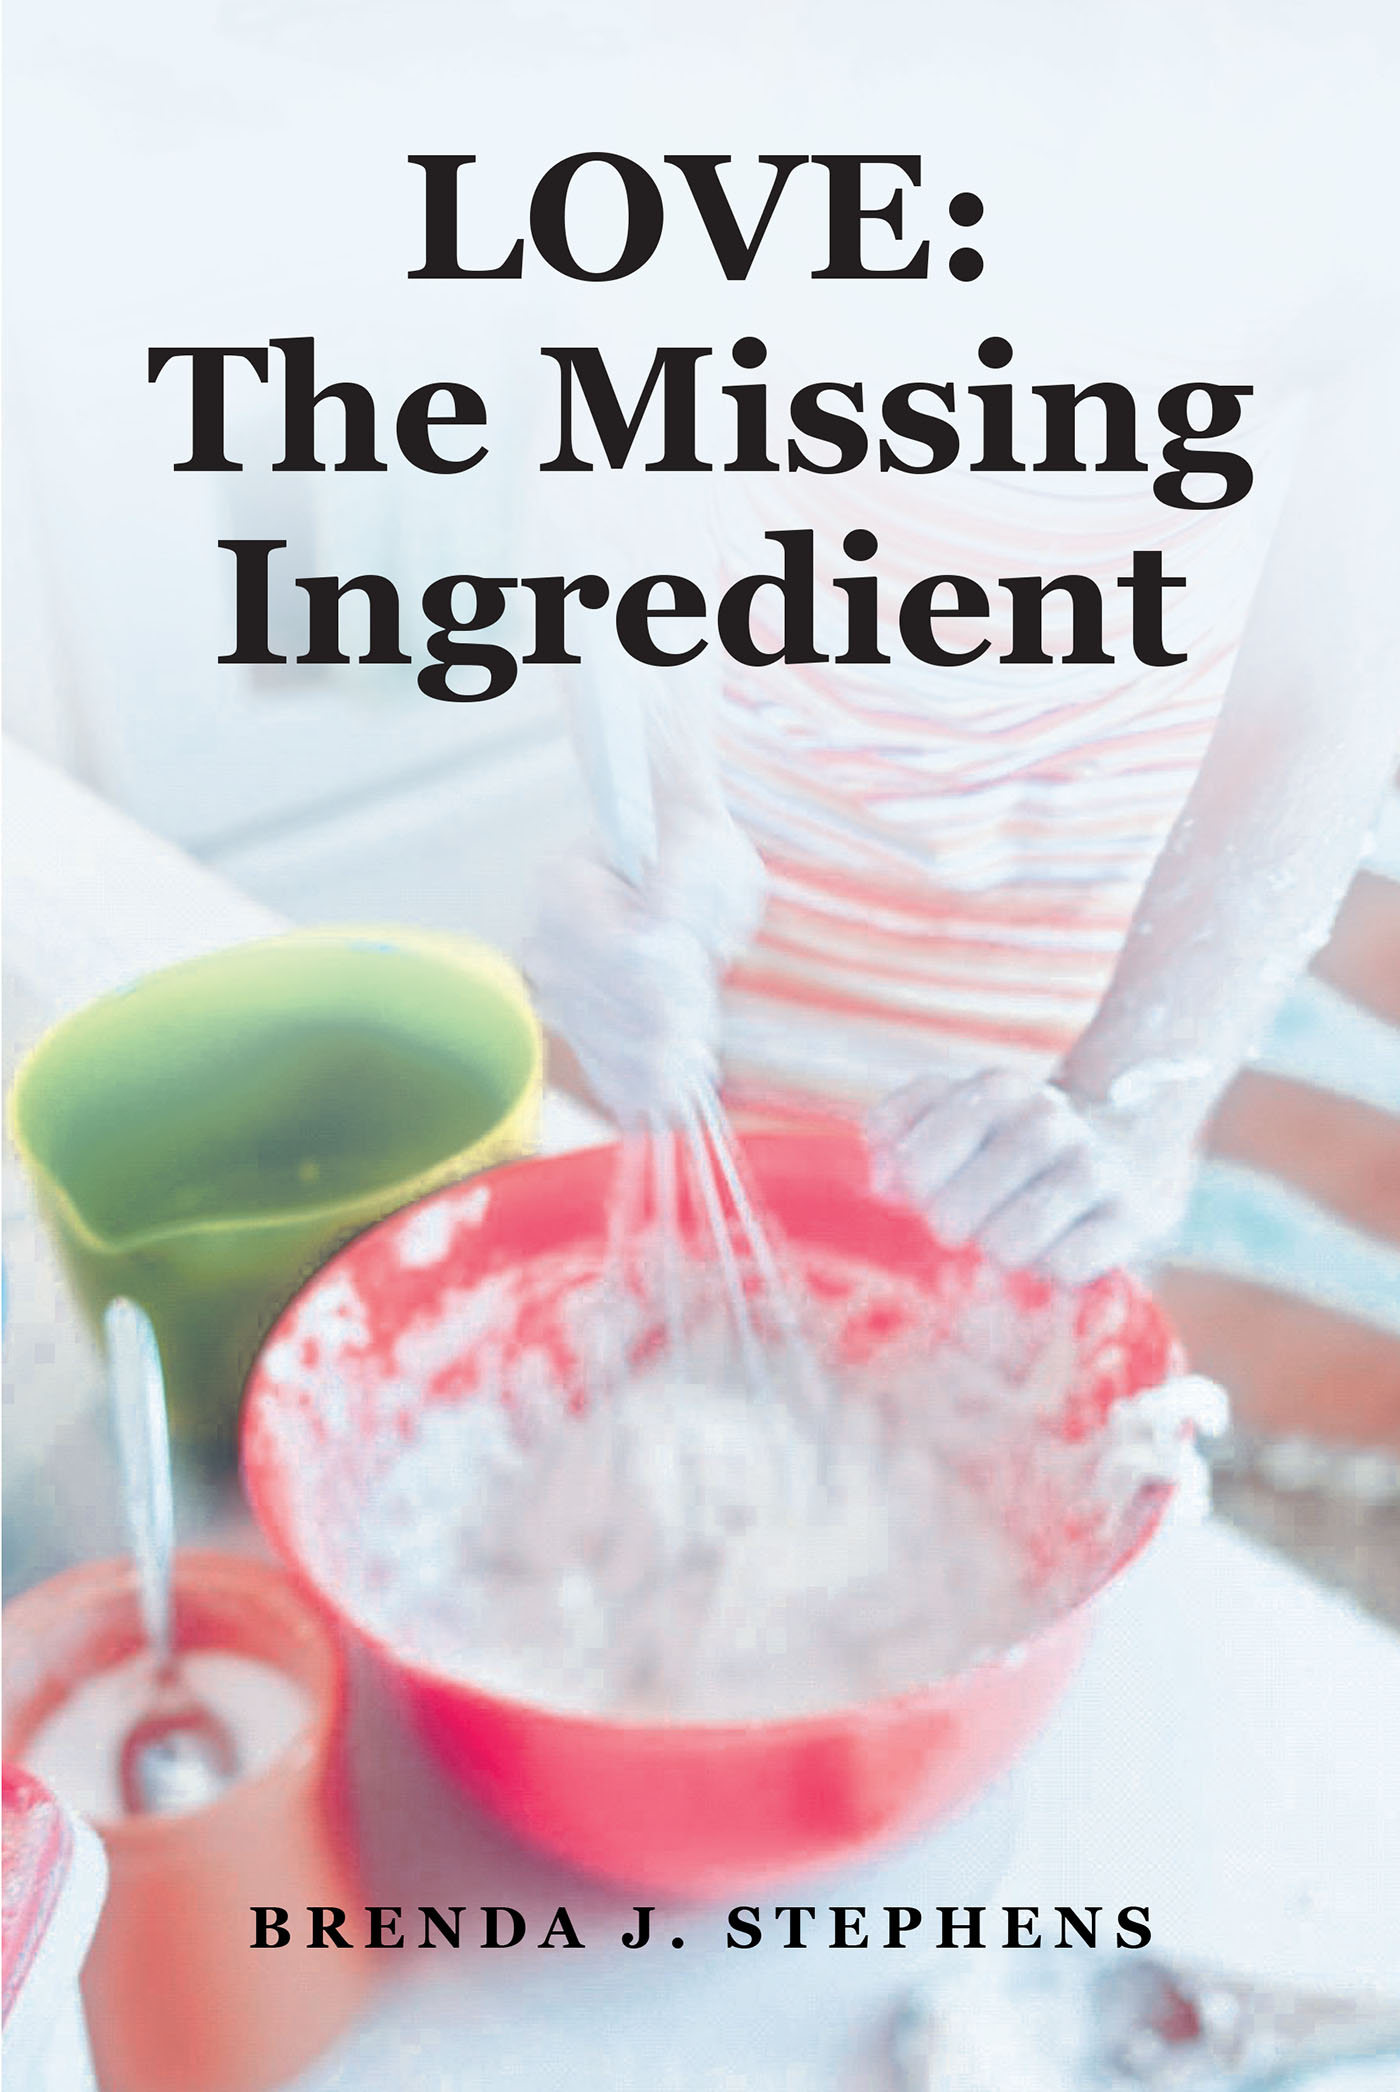 Brenda J. Stephens’s Newly Released “LOVE: The Missing Ingredient” is a Deeply Personal Reflection on the Need for God’s Love